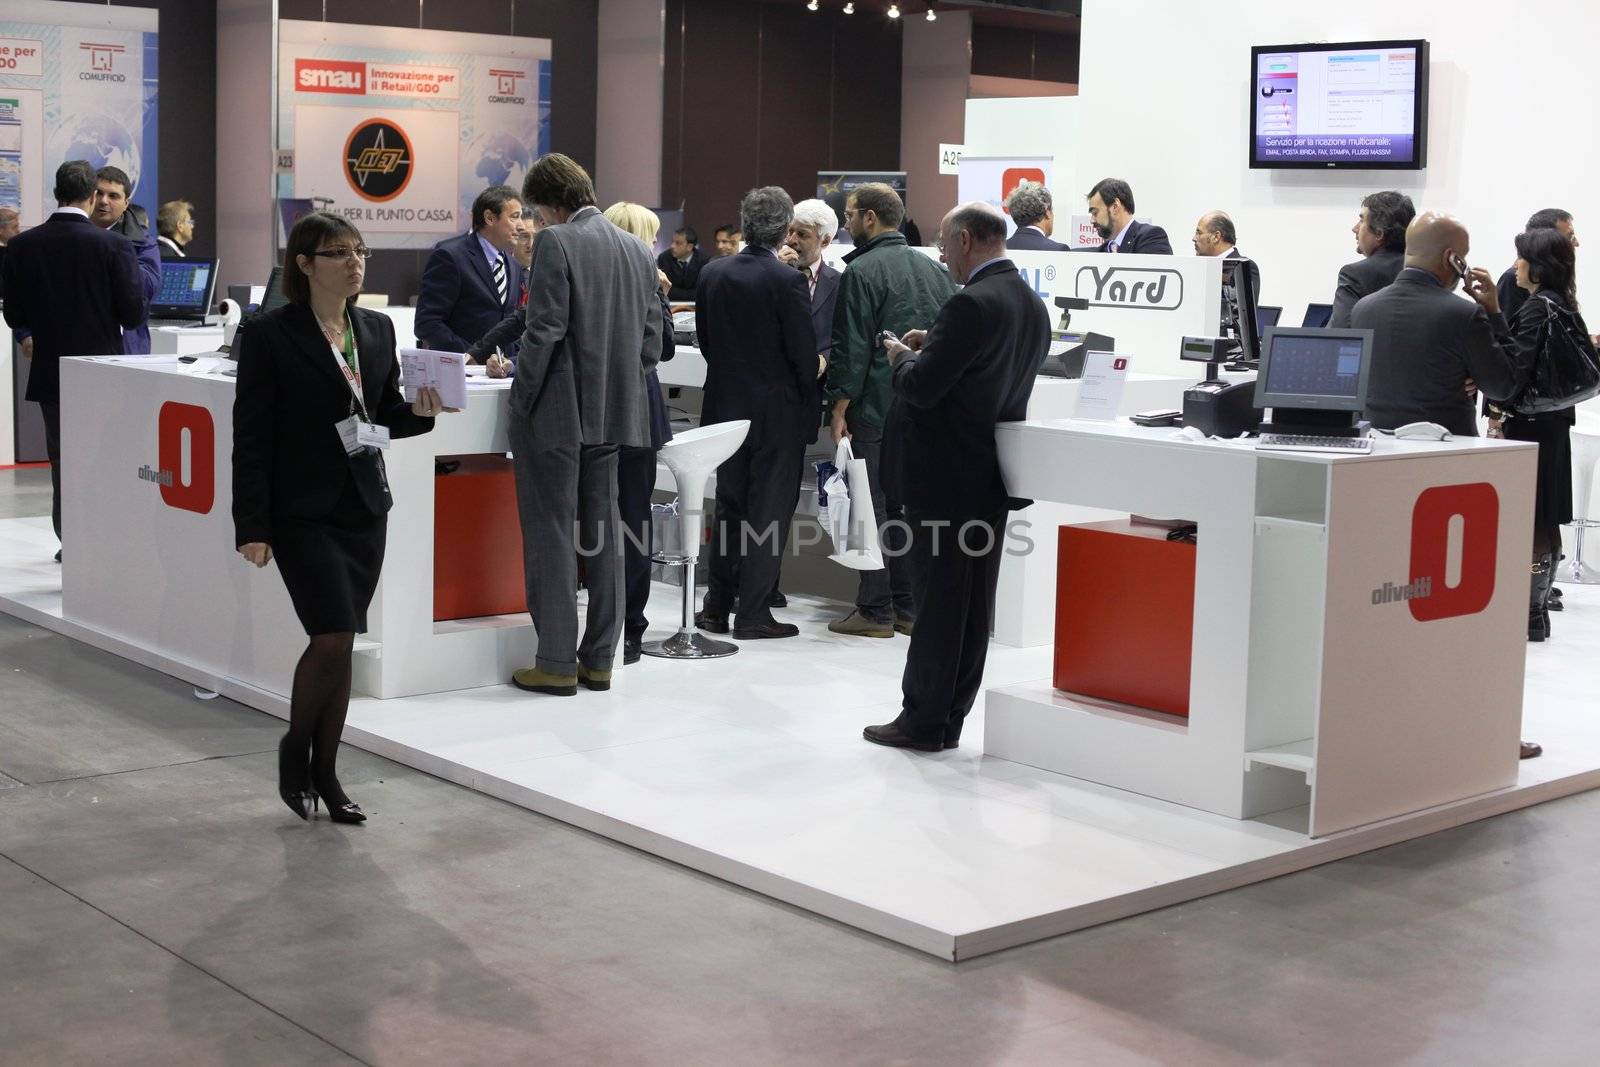 People asking for information at Olivetti stand, Smau, national fair of business intelligence and information technology October 21, 2009 in Milan, Italy.